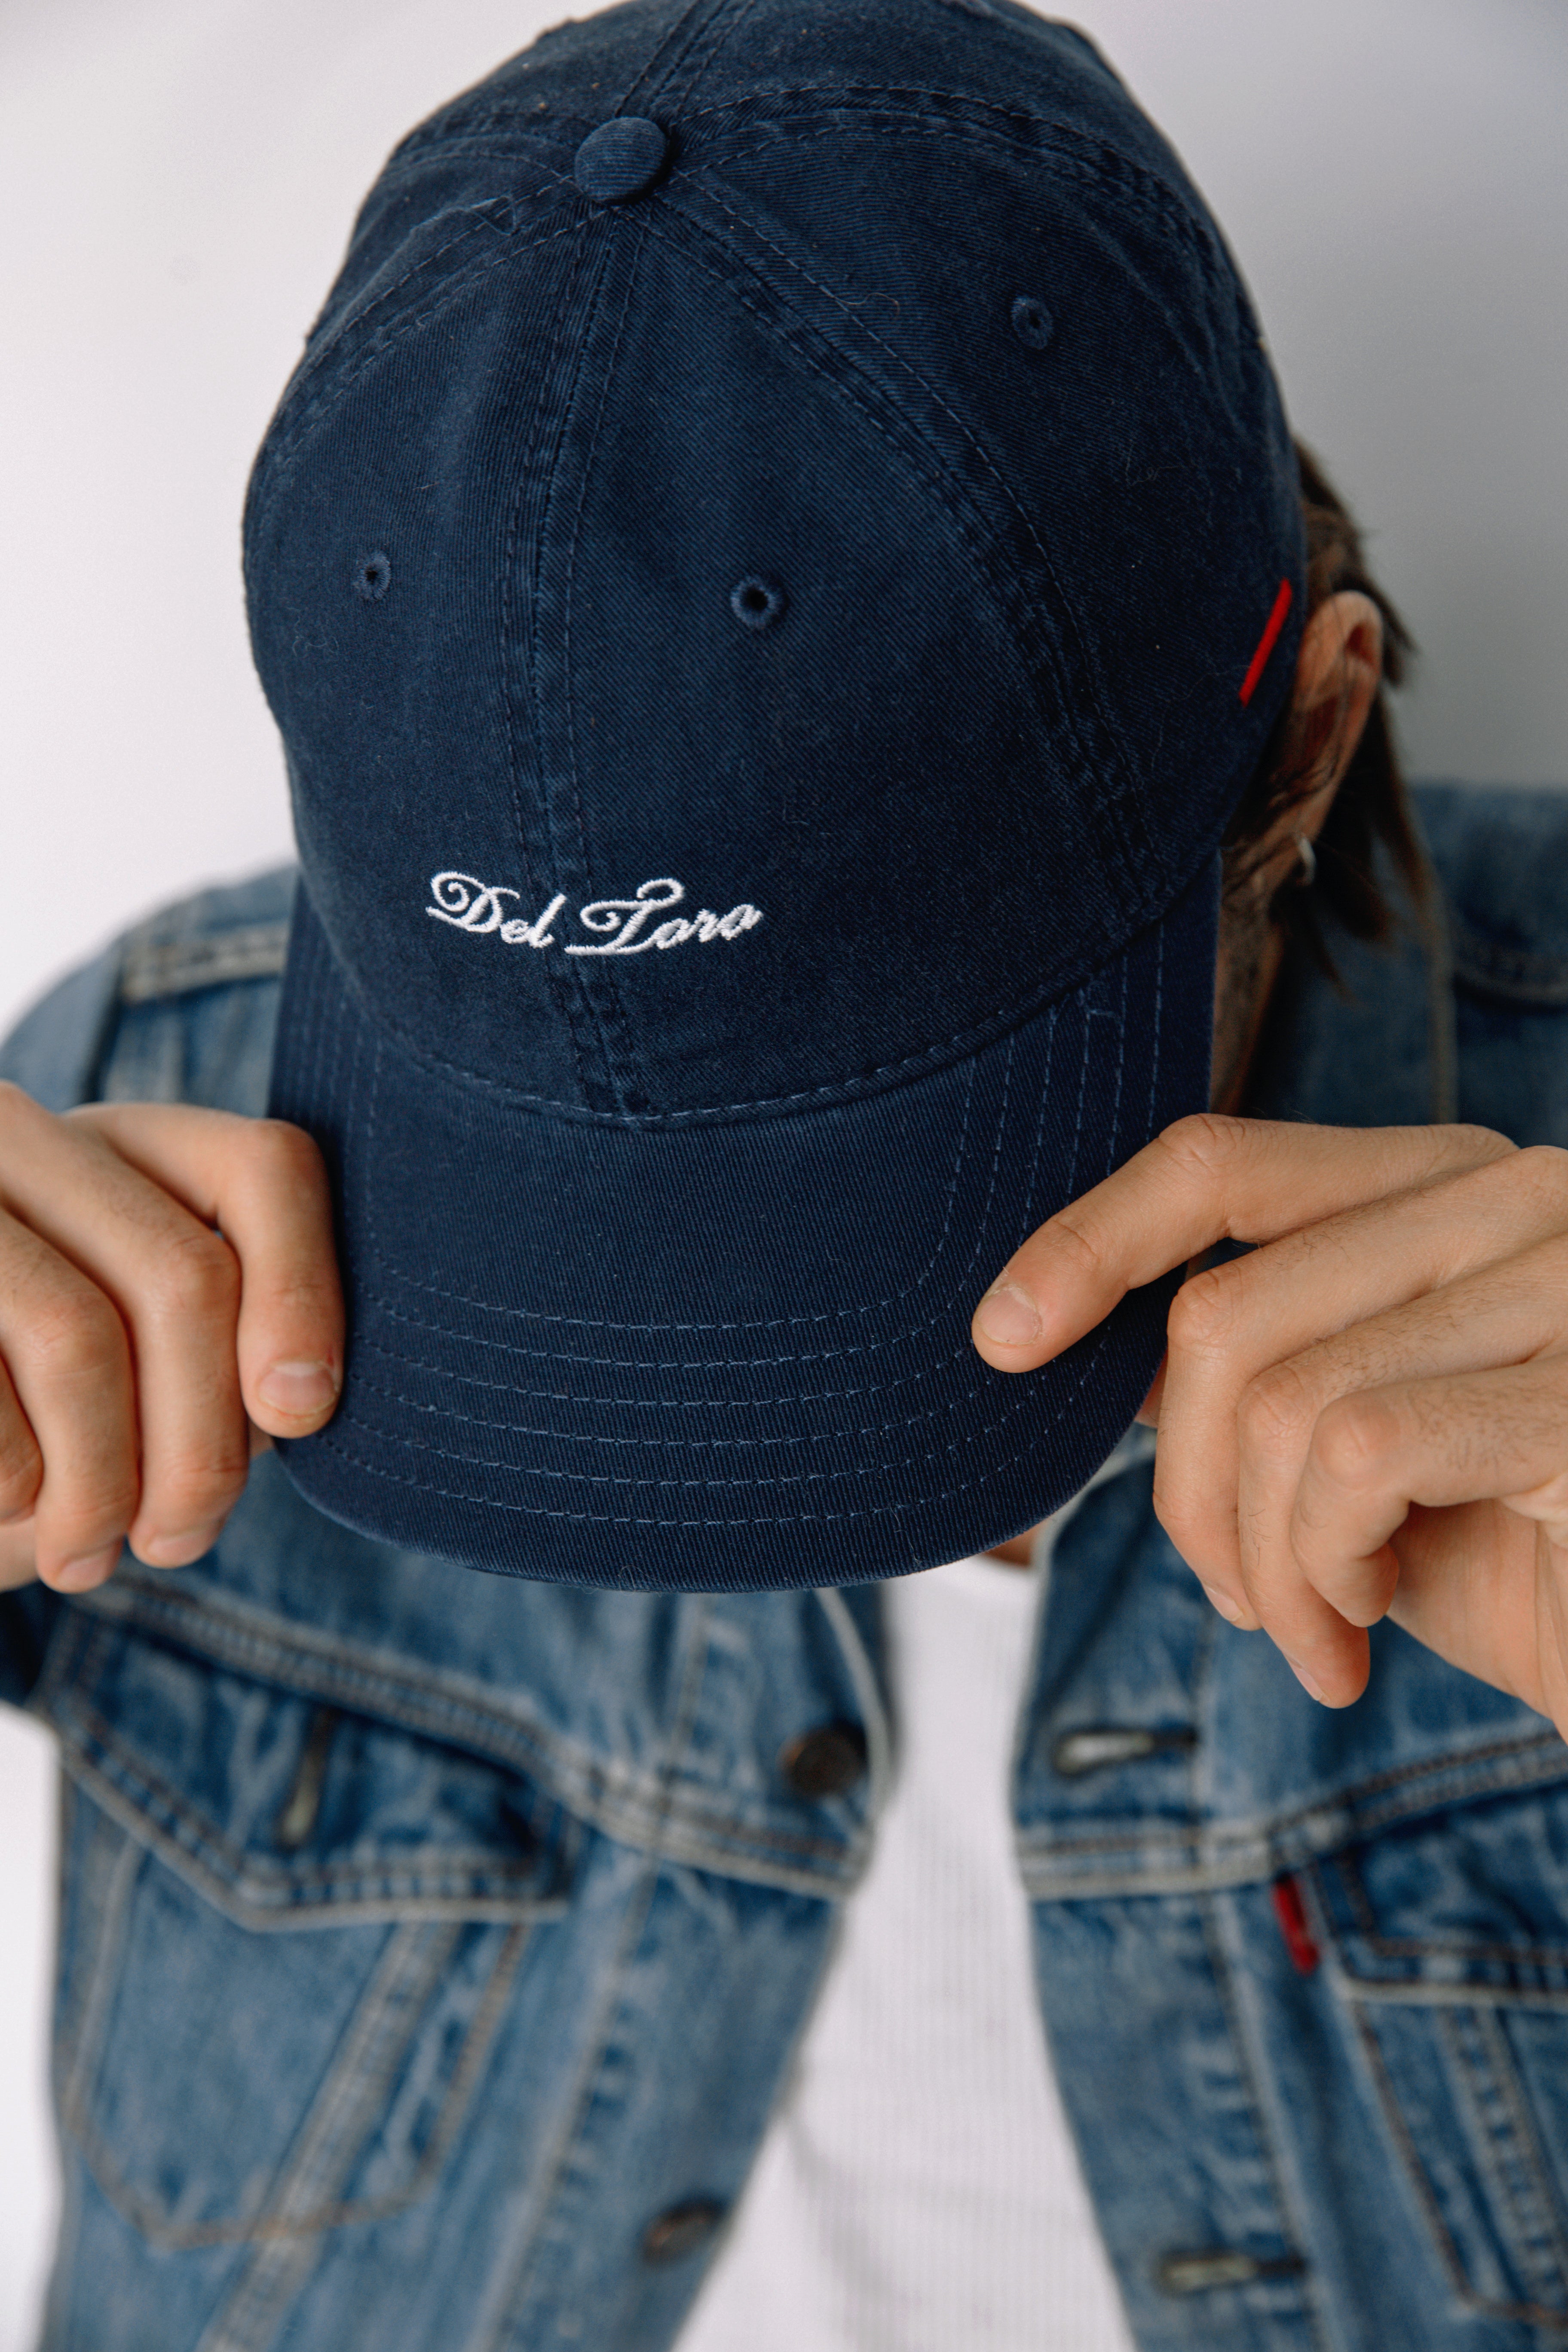 Navy Embroidered Cotton-Twill Adjustable Baseball Cap